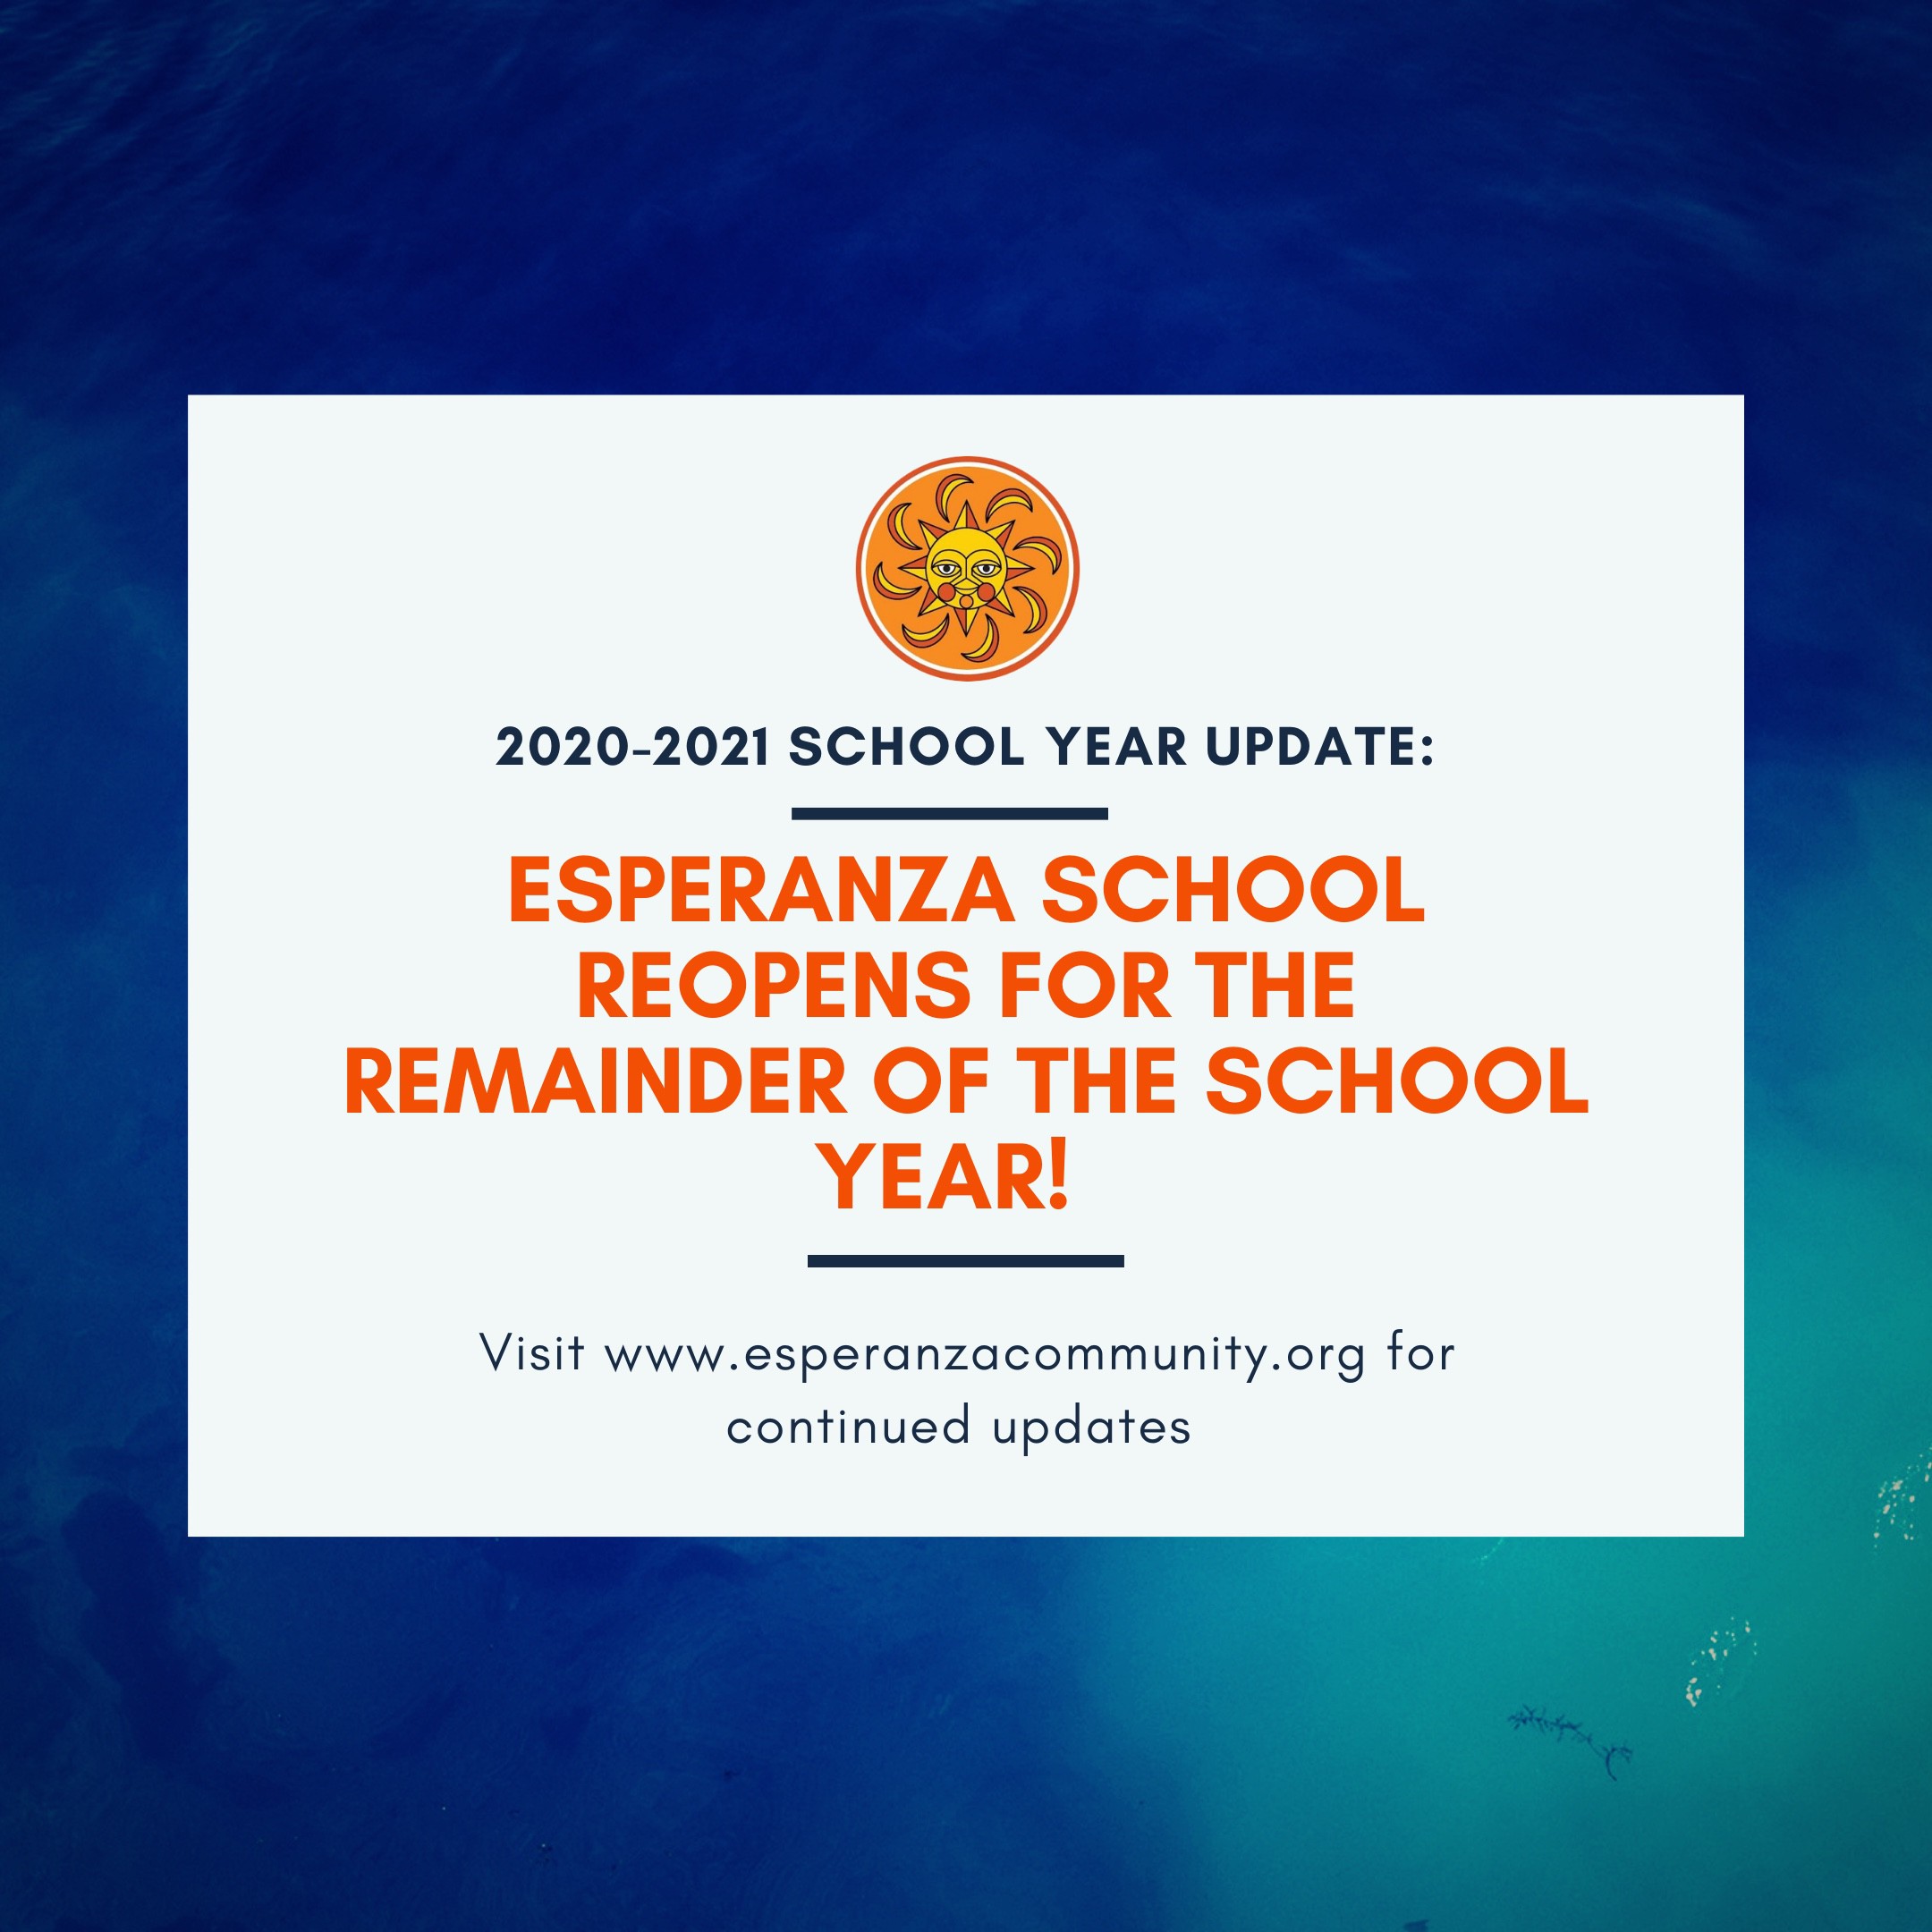 Esperanza School Returns to In-Person Learning After One Year of Remote Learning